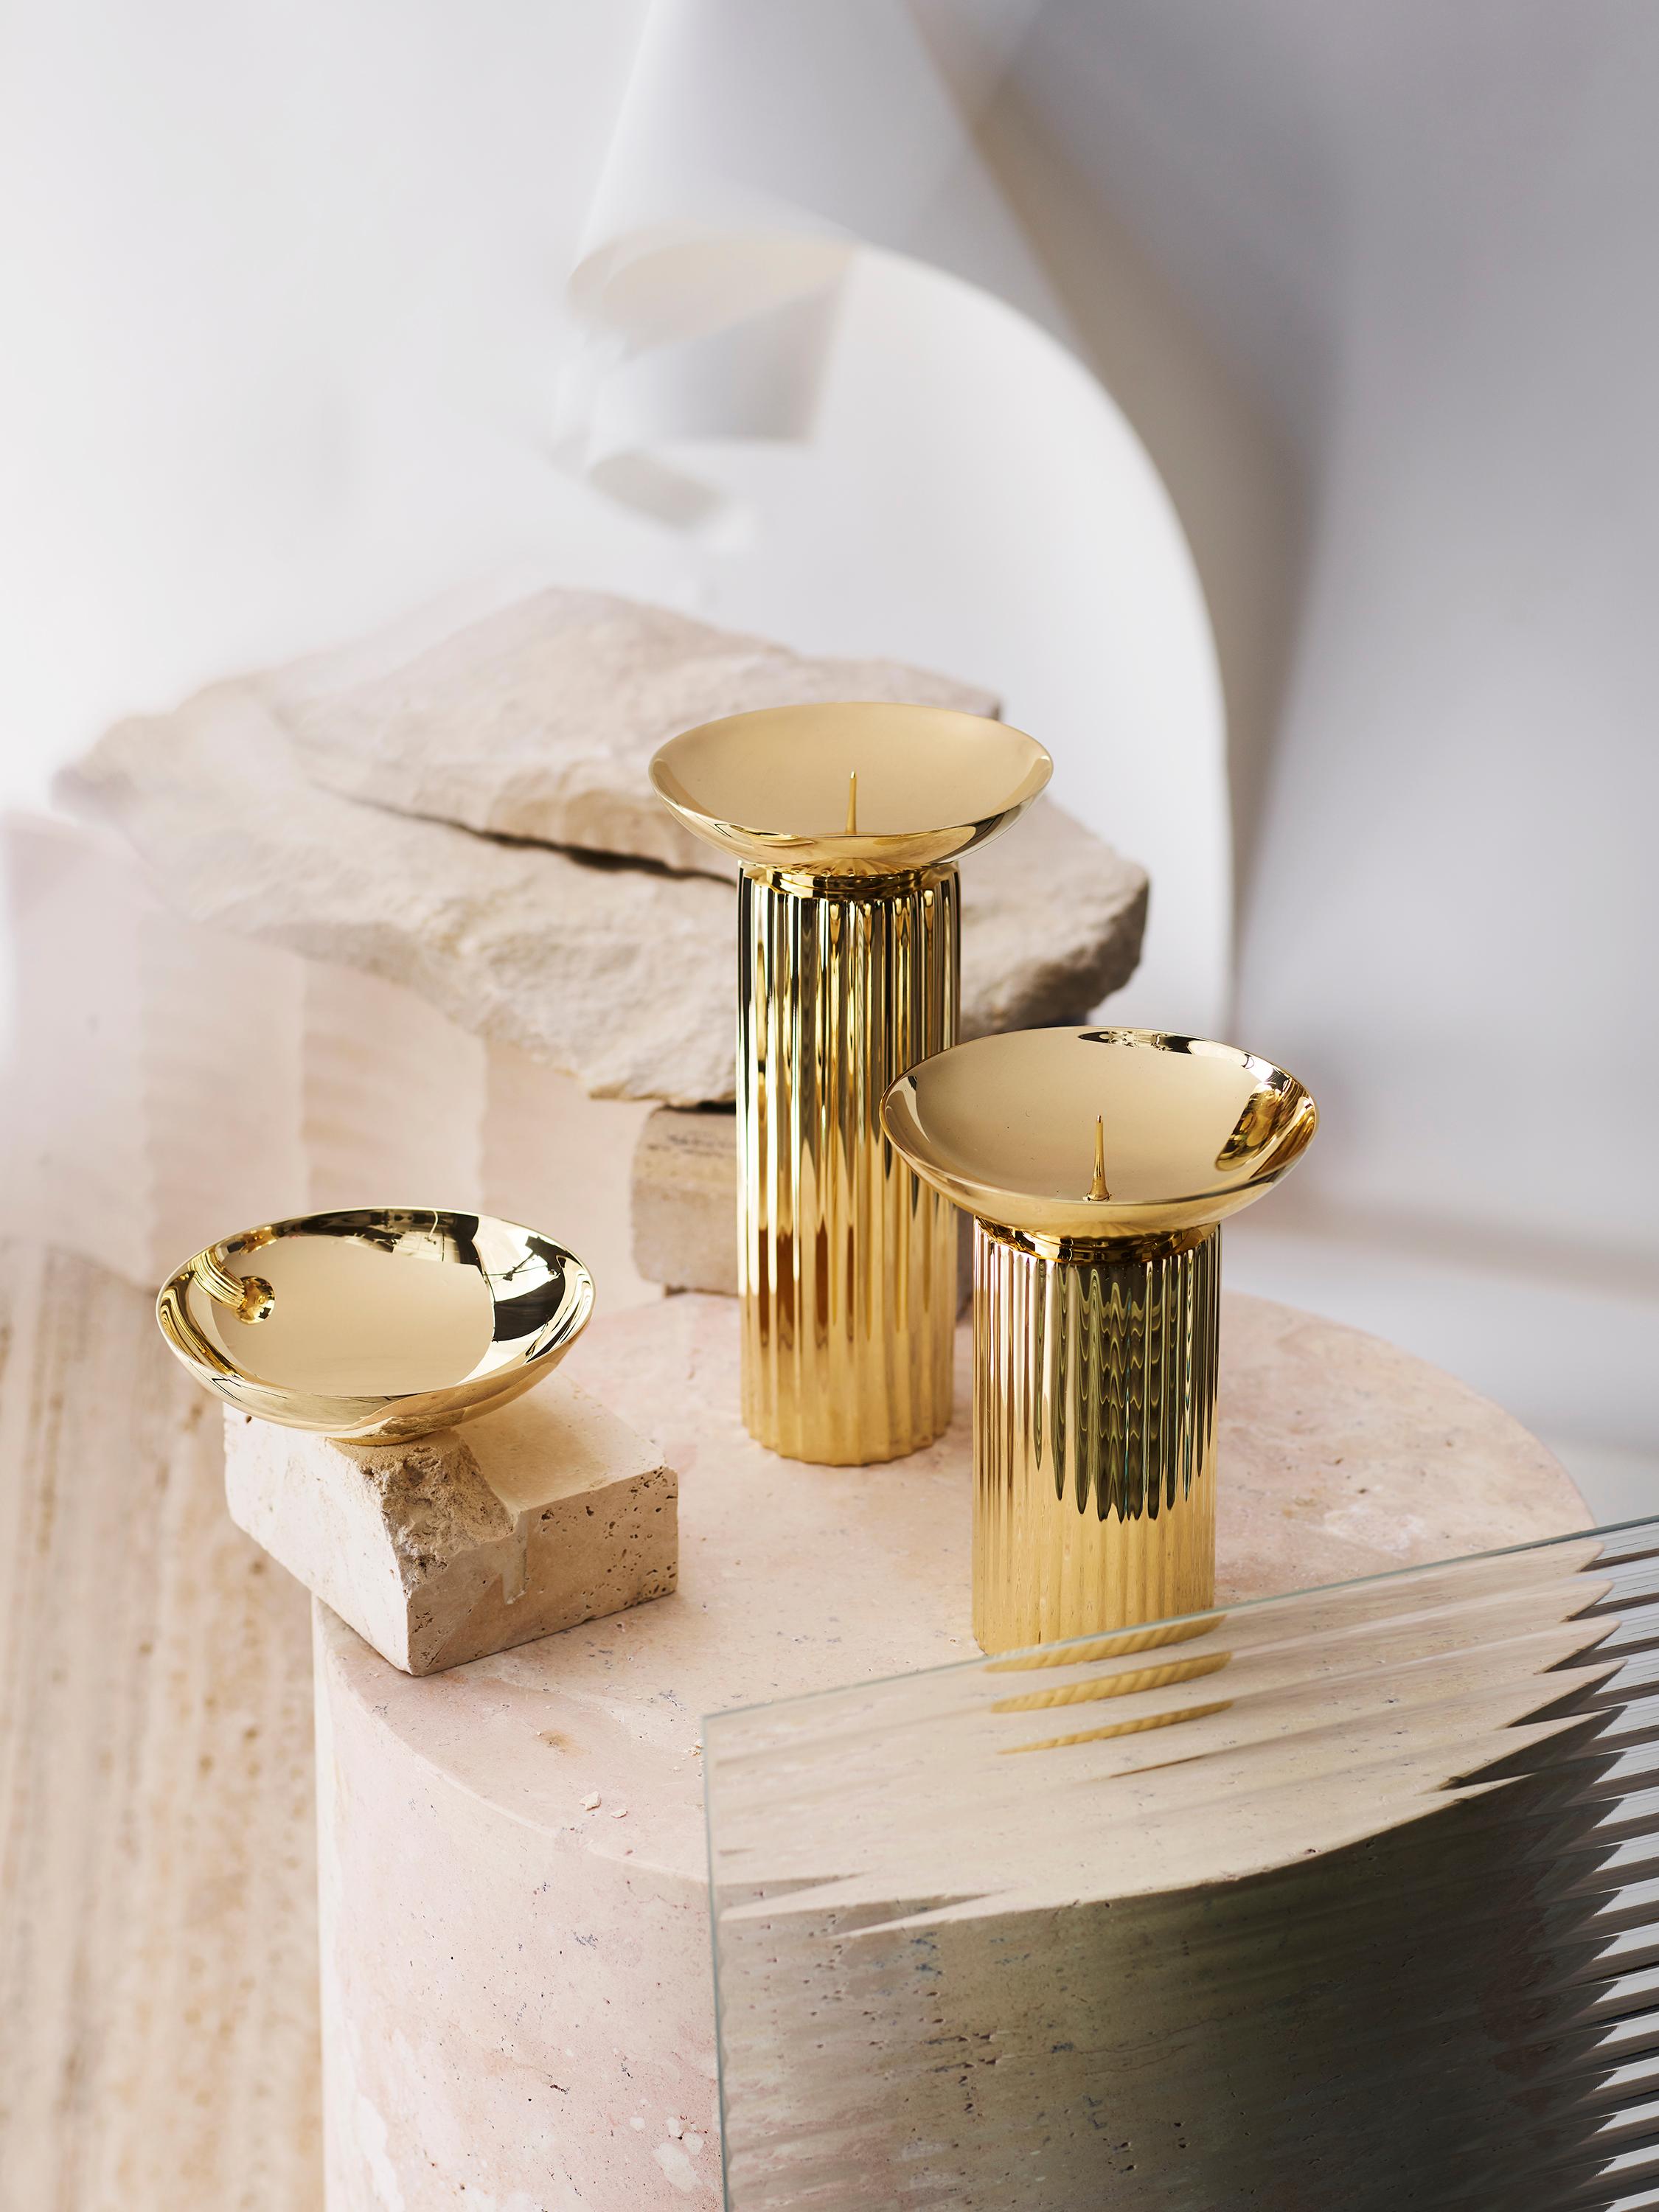 Nothing beats the impeccable gleam of solid, hand-polished brass for that final elegant, decorative layer to your interior. Characterized by its superb finish and irregular form, the visual and tactile appeal of the Athena Catchall will impress and